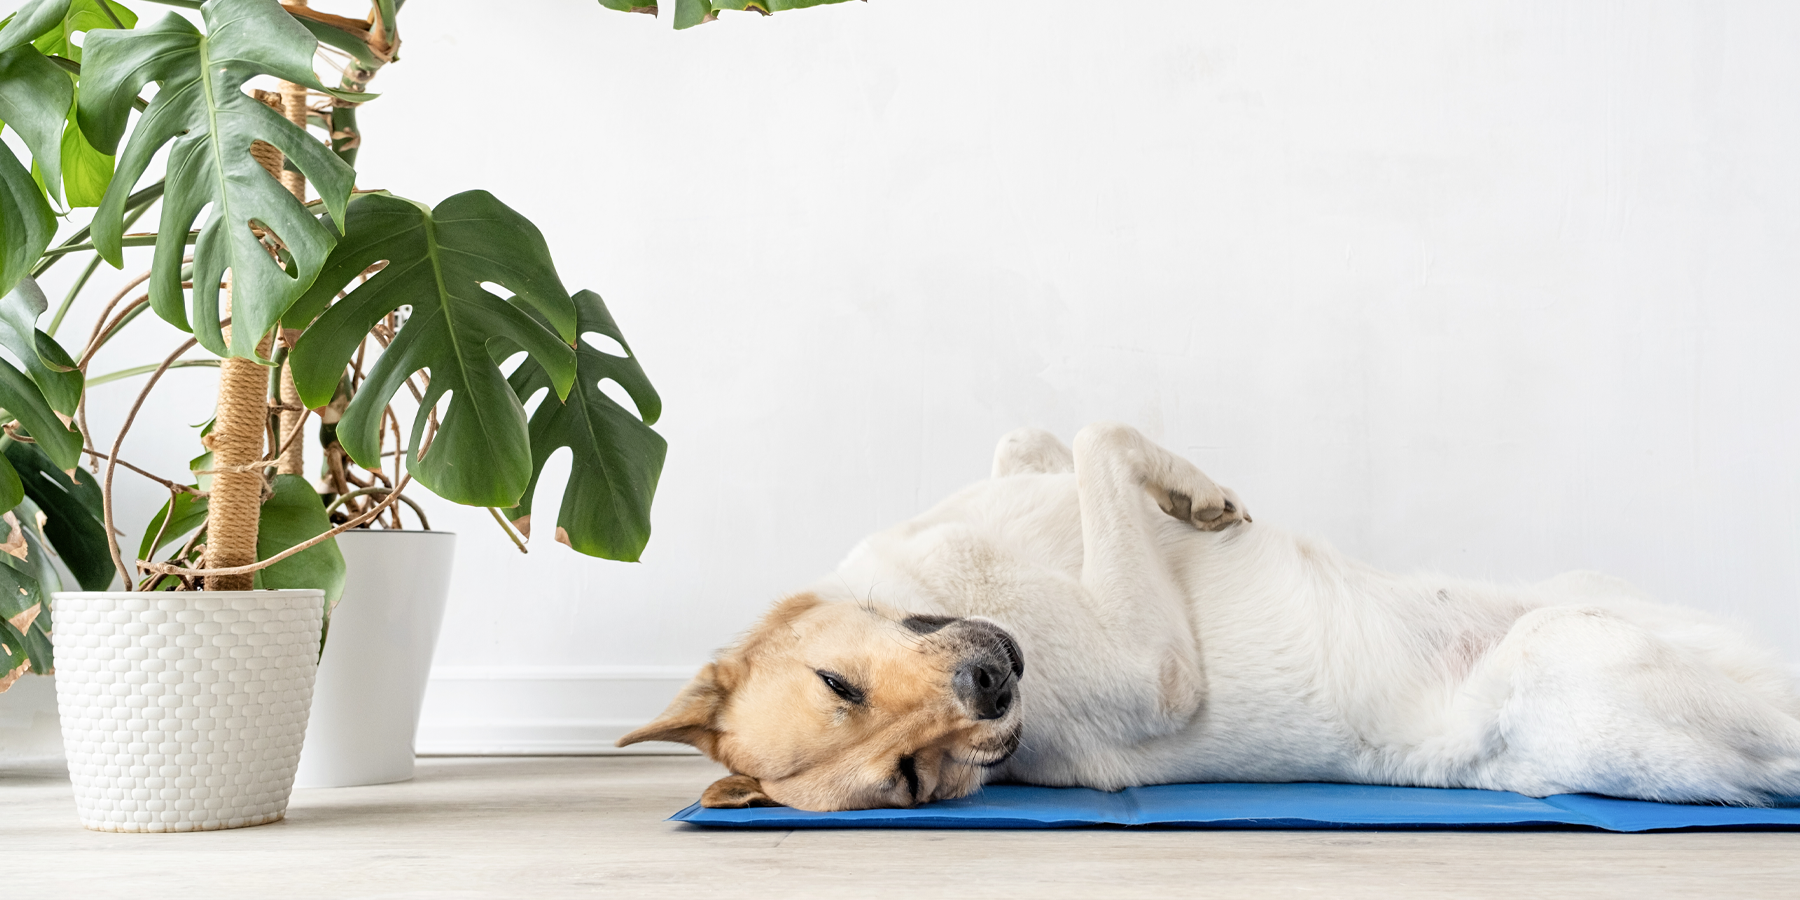 What Indoor Plants are Safe for Dogs?